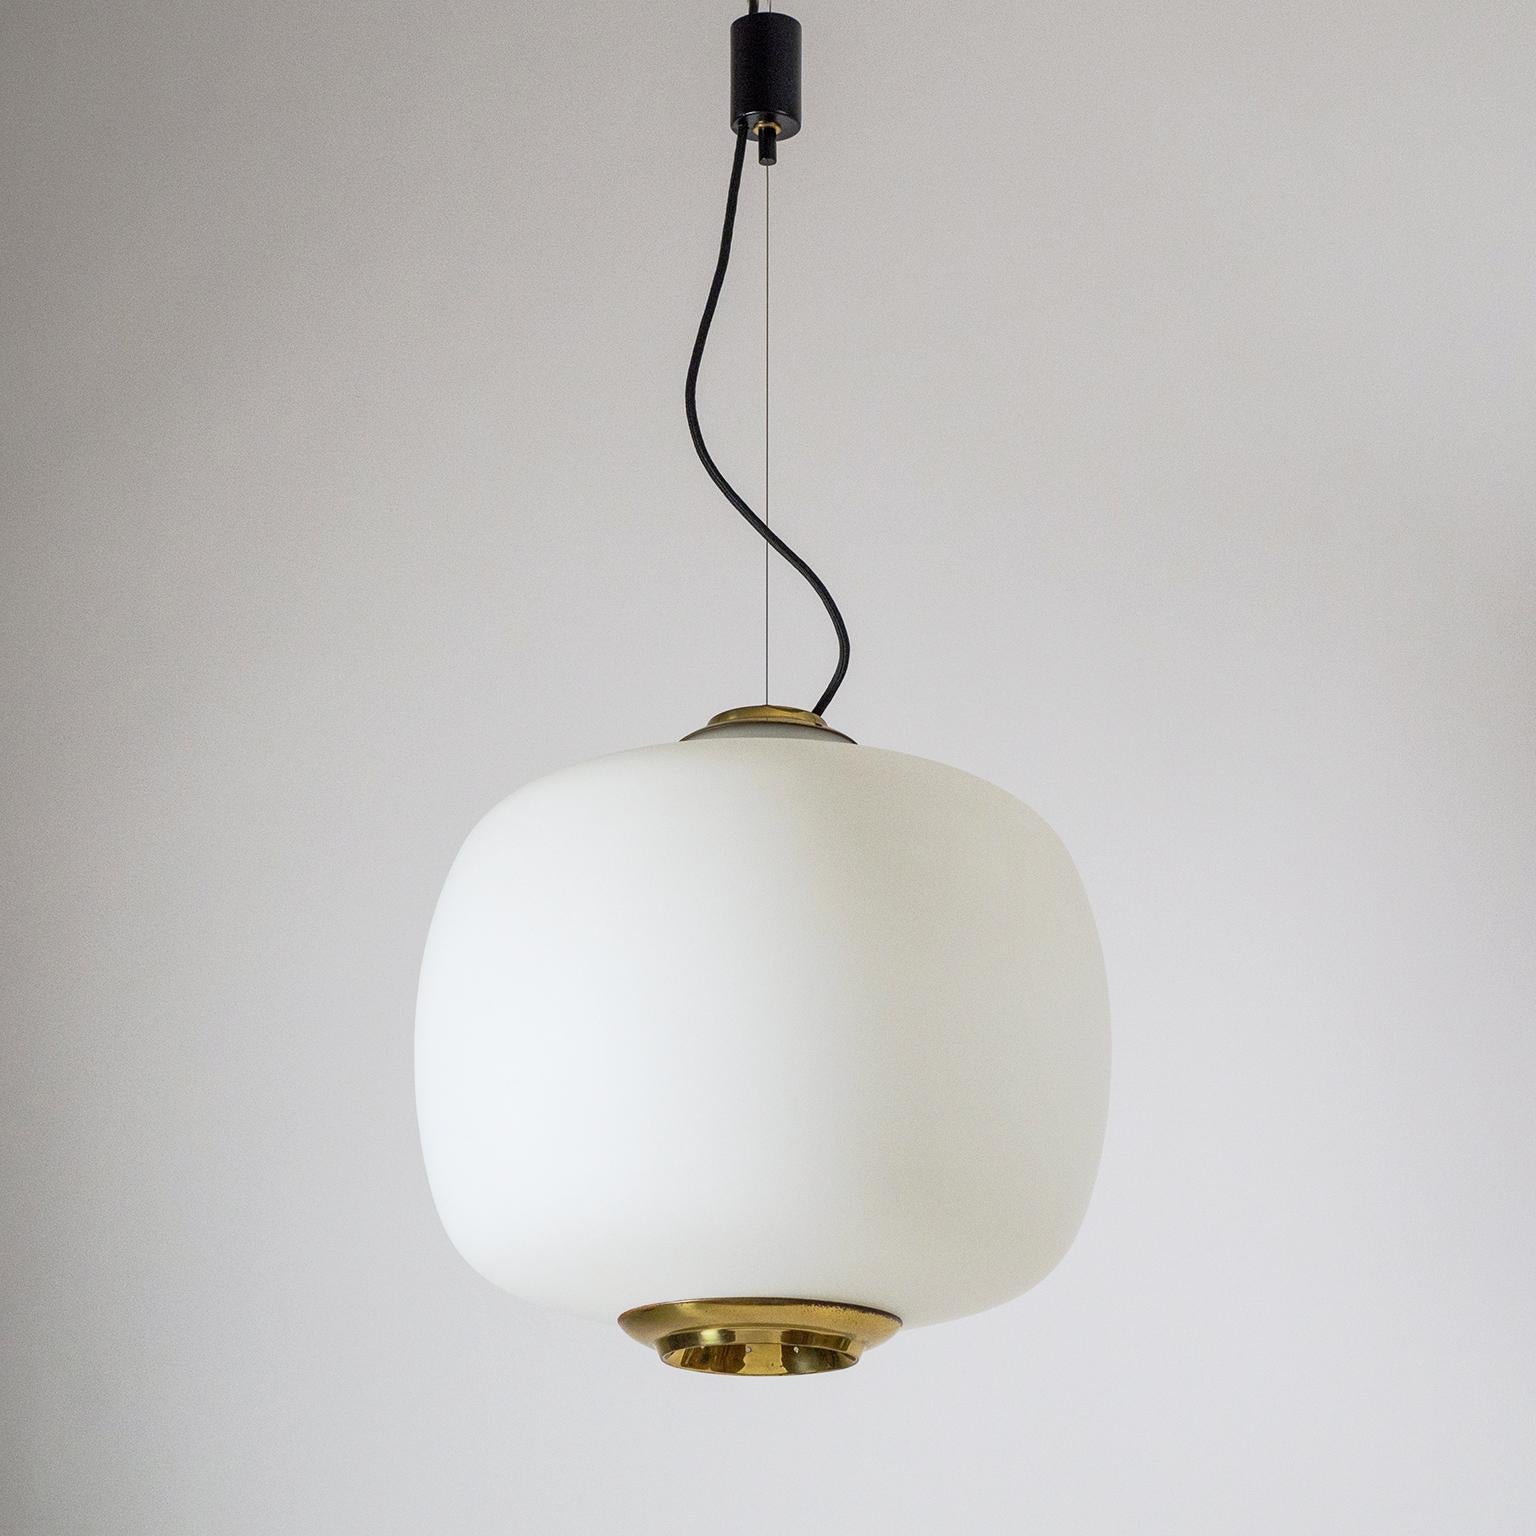 Very large and volumous satin glass and brass pendant chandelier attributed to Stilnovo, early 1960s. Beautifully shaped large blown 'triplex opal' glass body with a satin finish; sculpted and pierced brass covers on top and bottom. Suspended by a